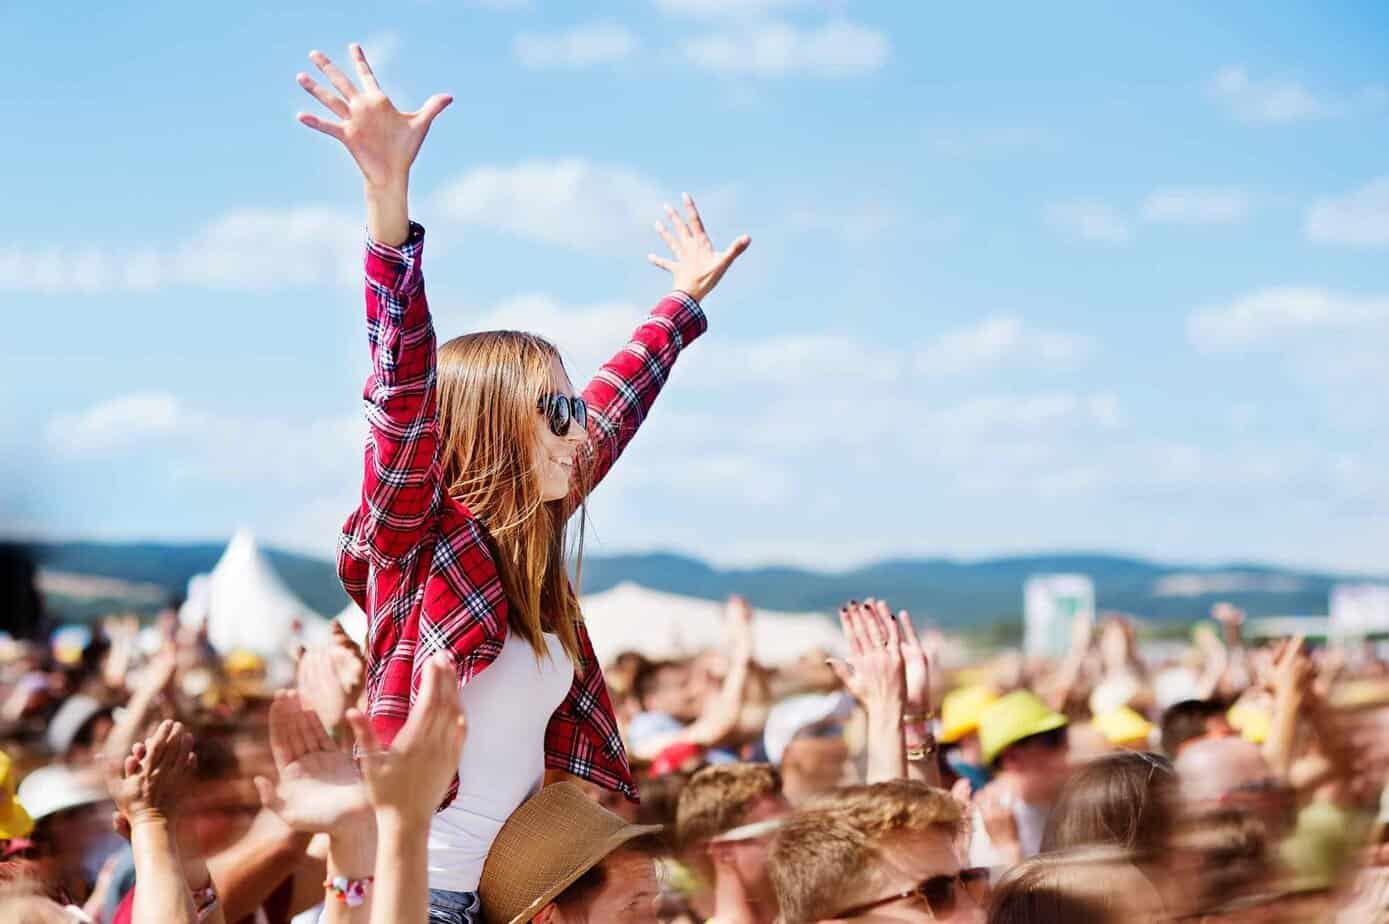 woman celebrating in crowd at music festival